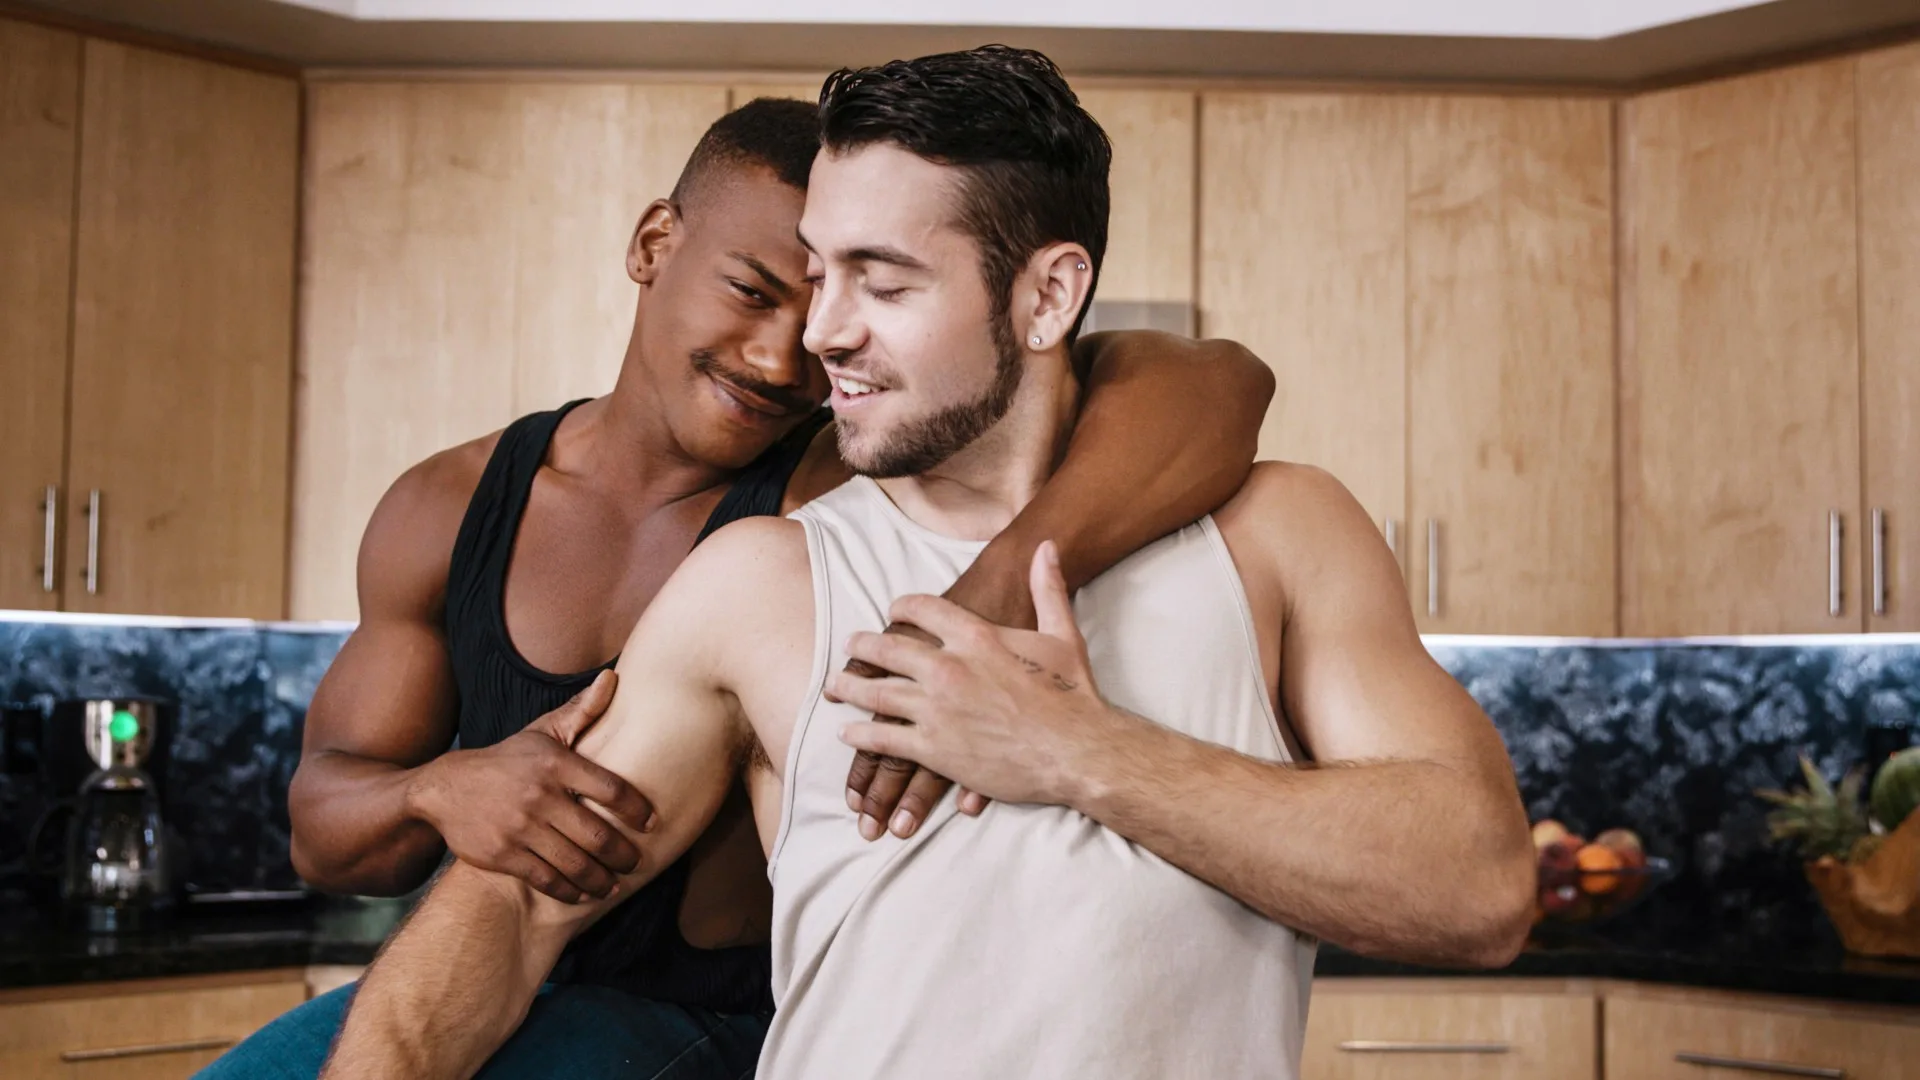 Hot Haus: Shhh I Live With My Ex - BlackMaleMe